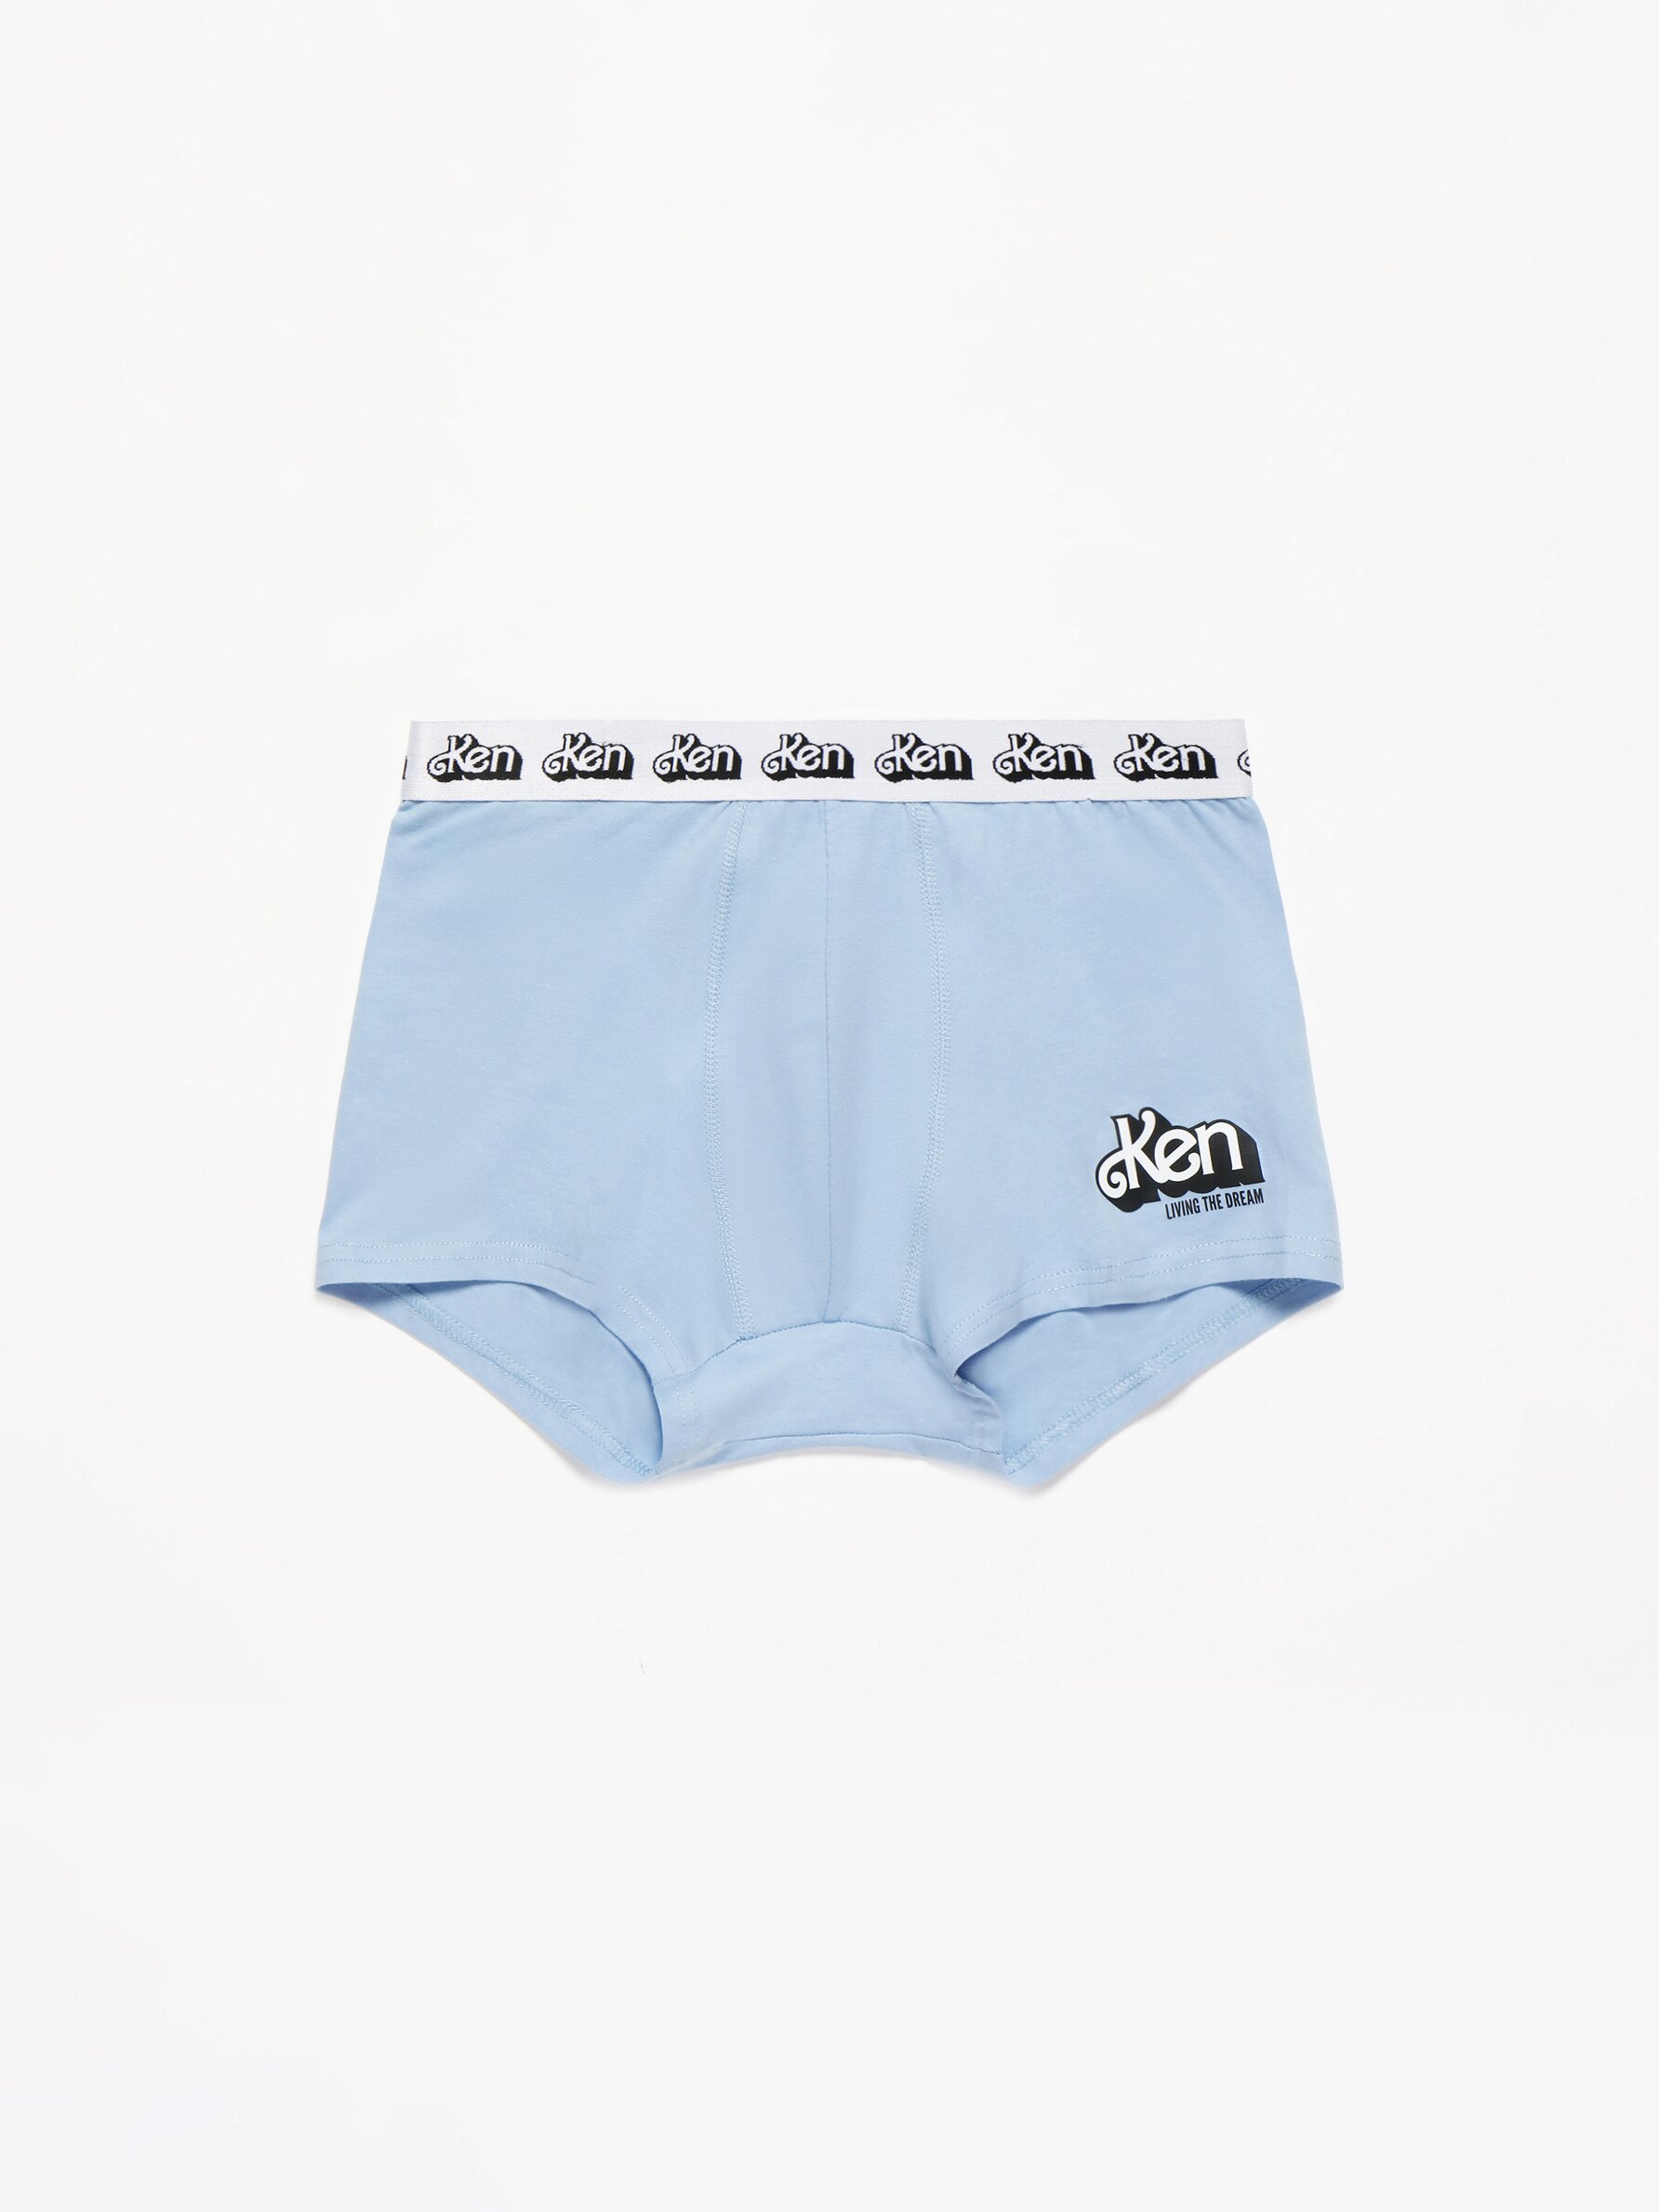 Nuno life: Briefs and boxers for Ken - actually these are for bigger dolls,  but the patt…